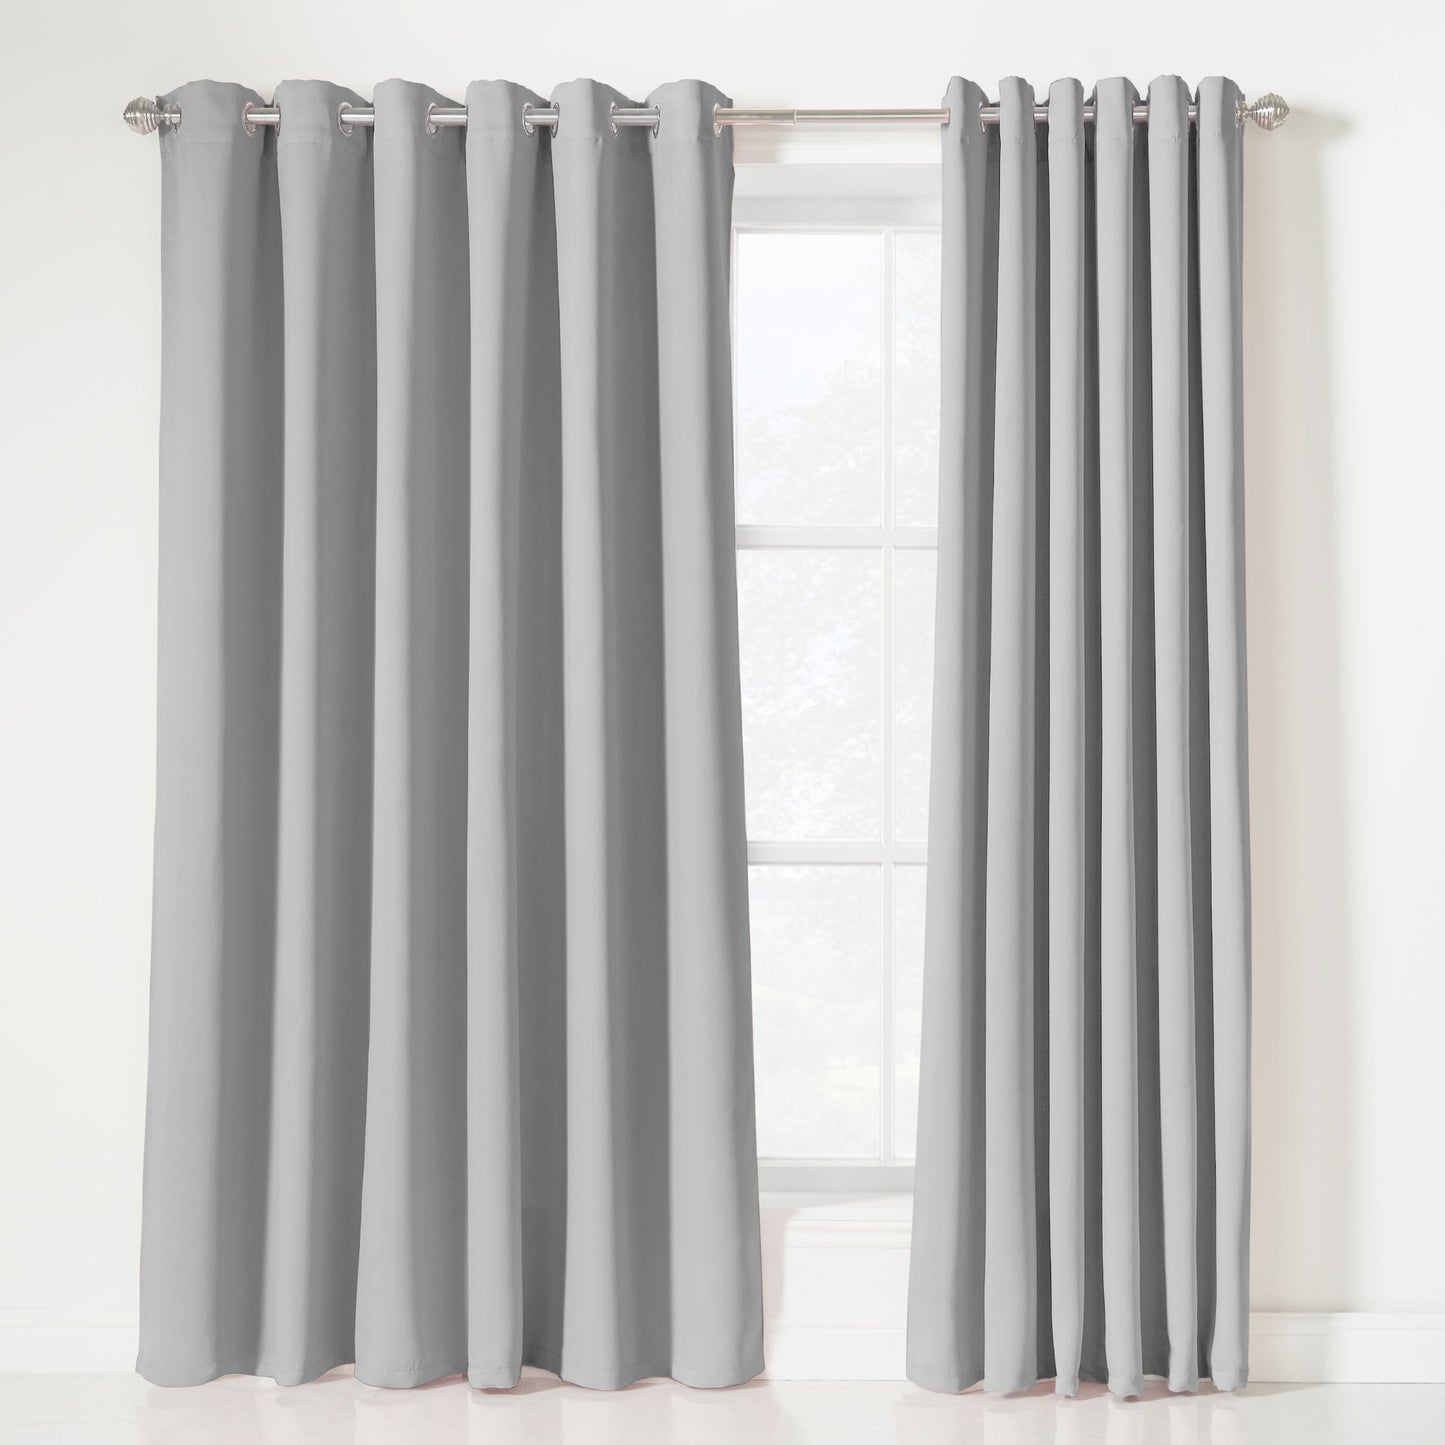 Eclipse Soft Touch Blockout Eyelet Curtains - Silver